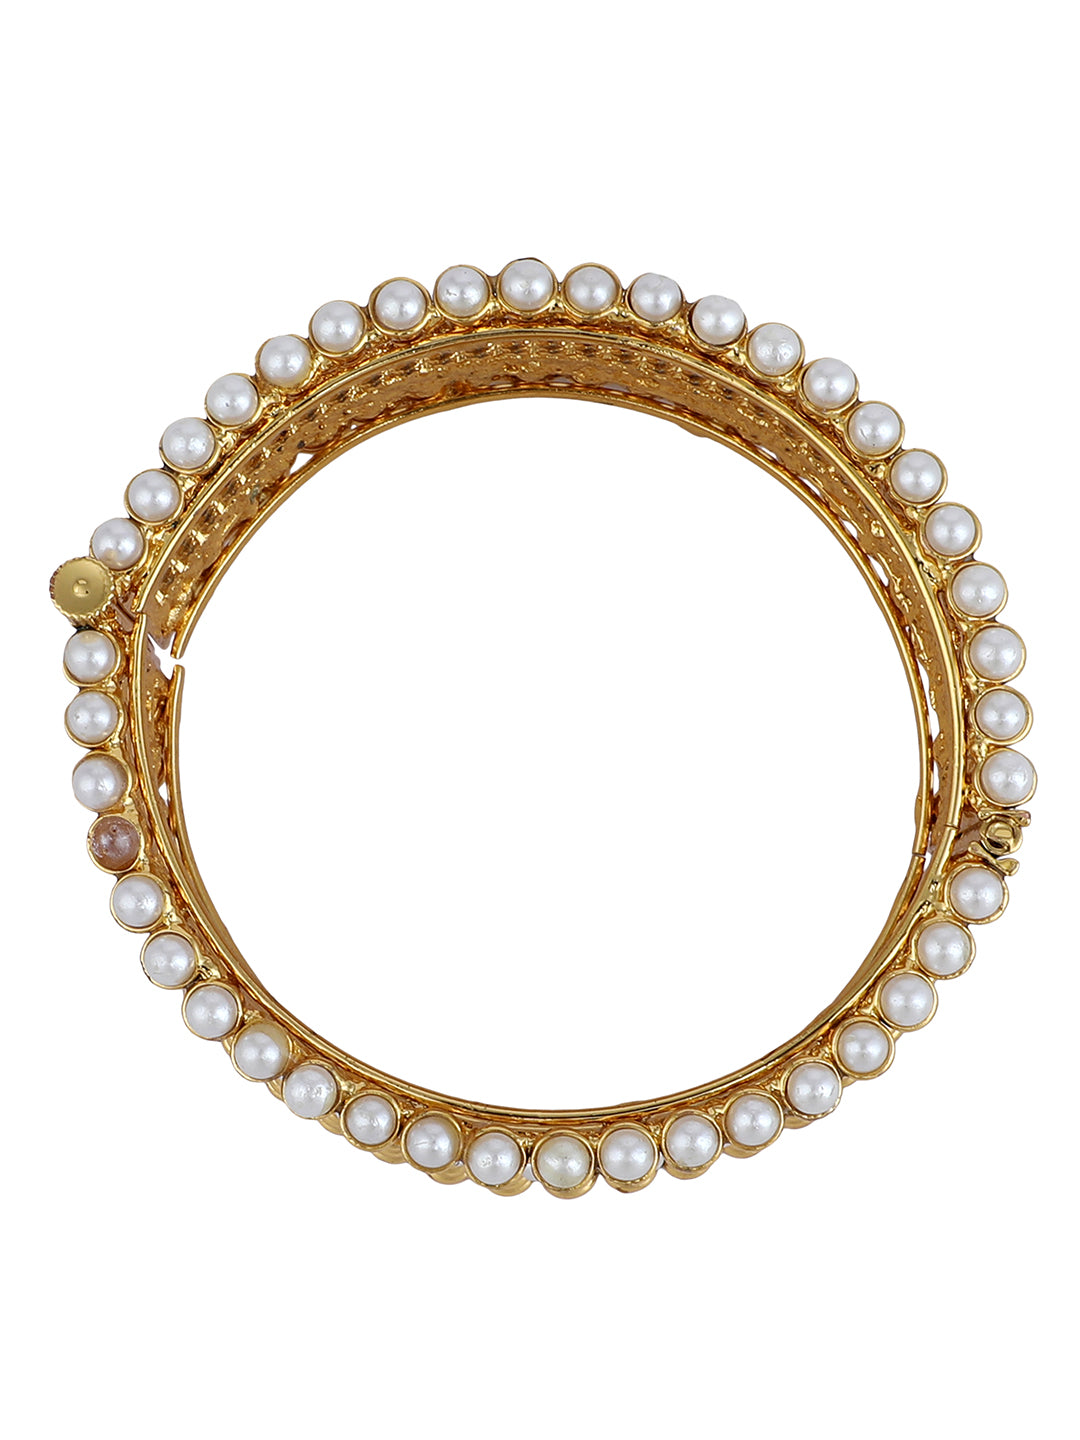 Women's Set Of 2 Gold-Plated Handcrafted Pearl Studded Bangles - Anikas Creation